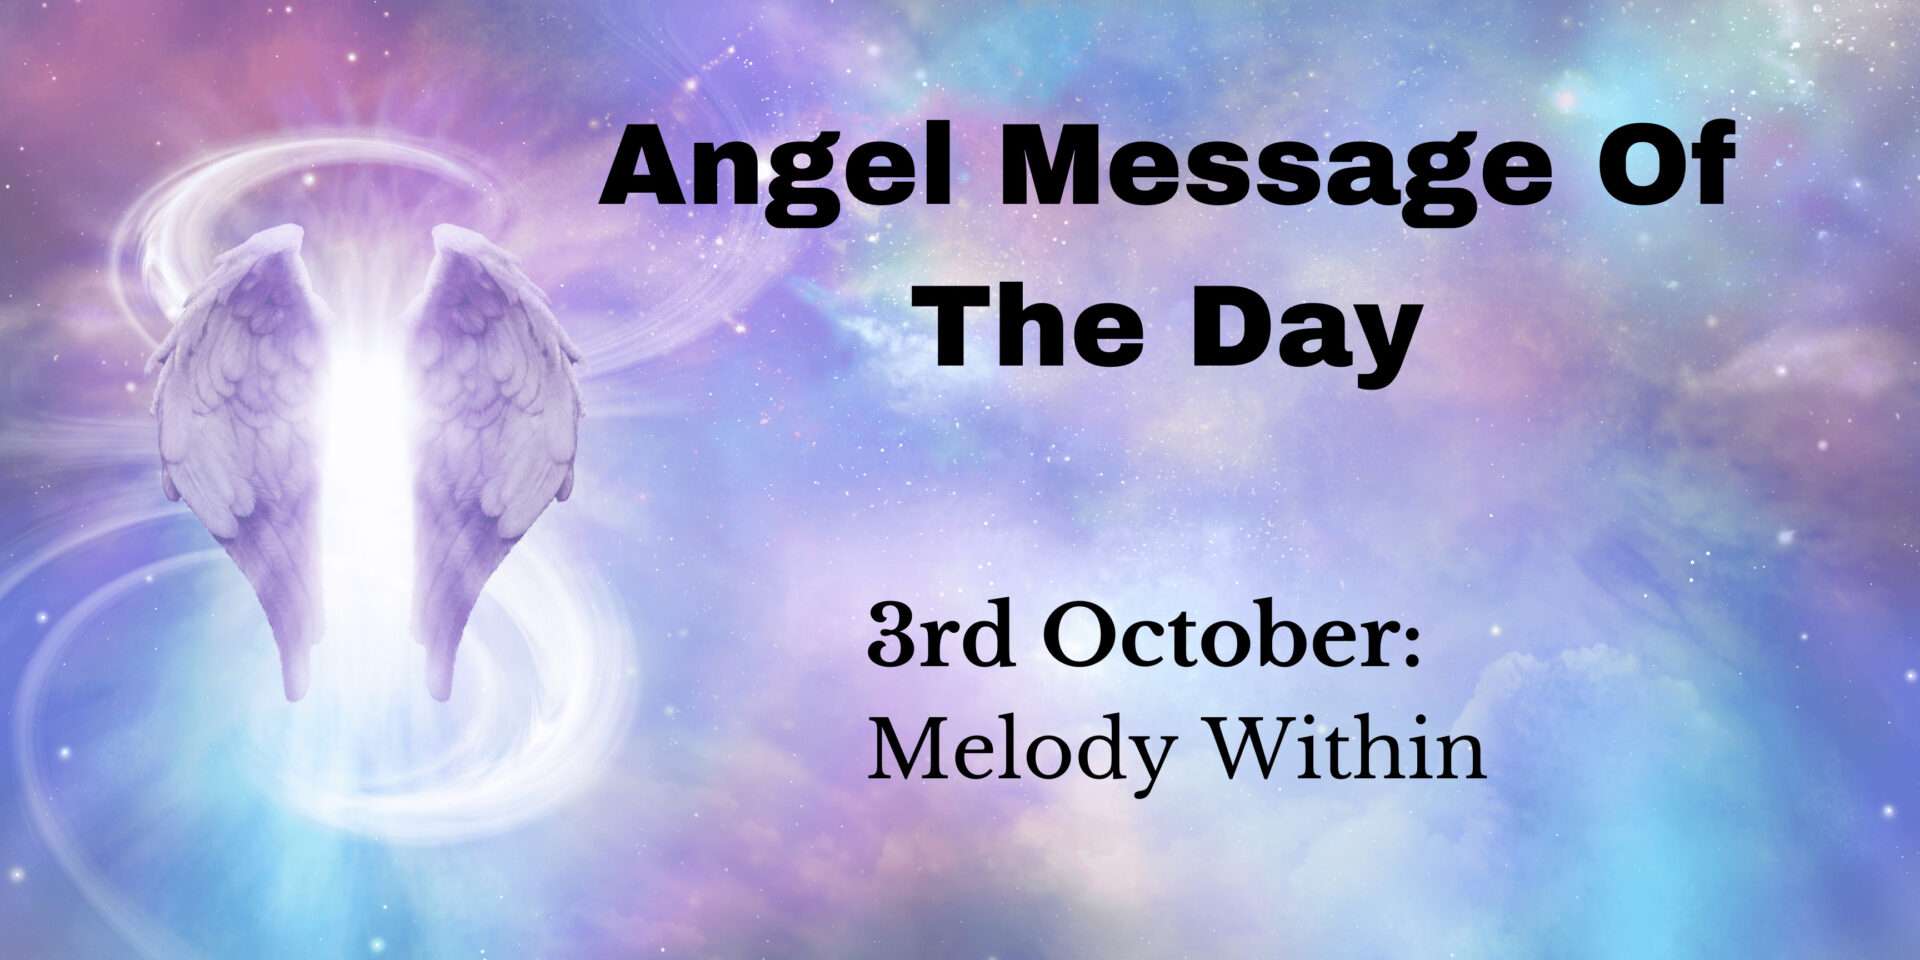 angel message of the day : melody within